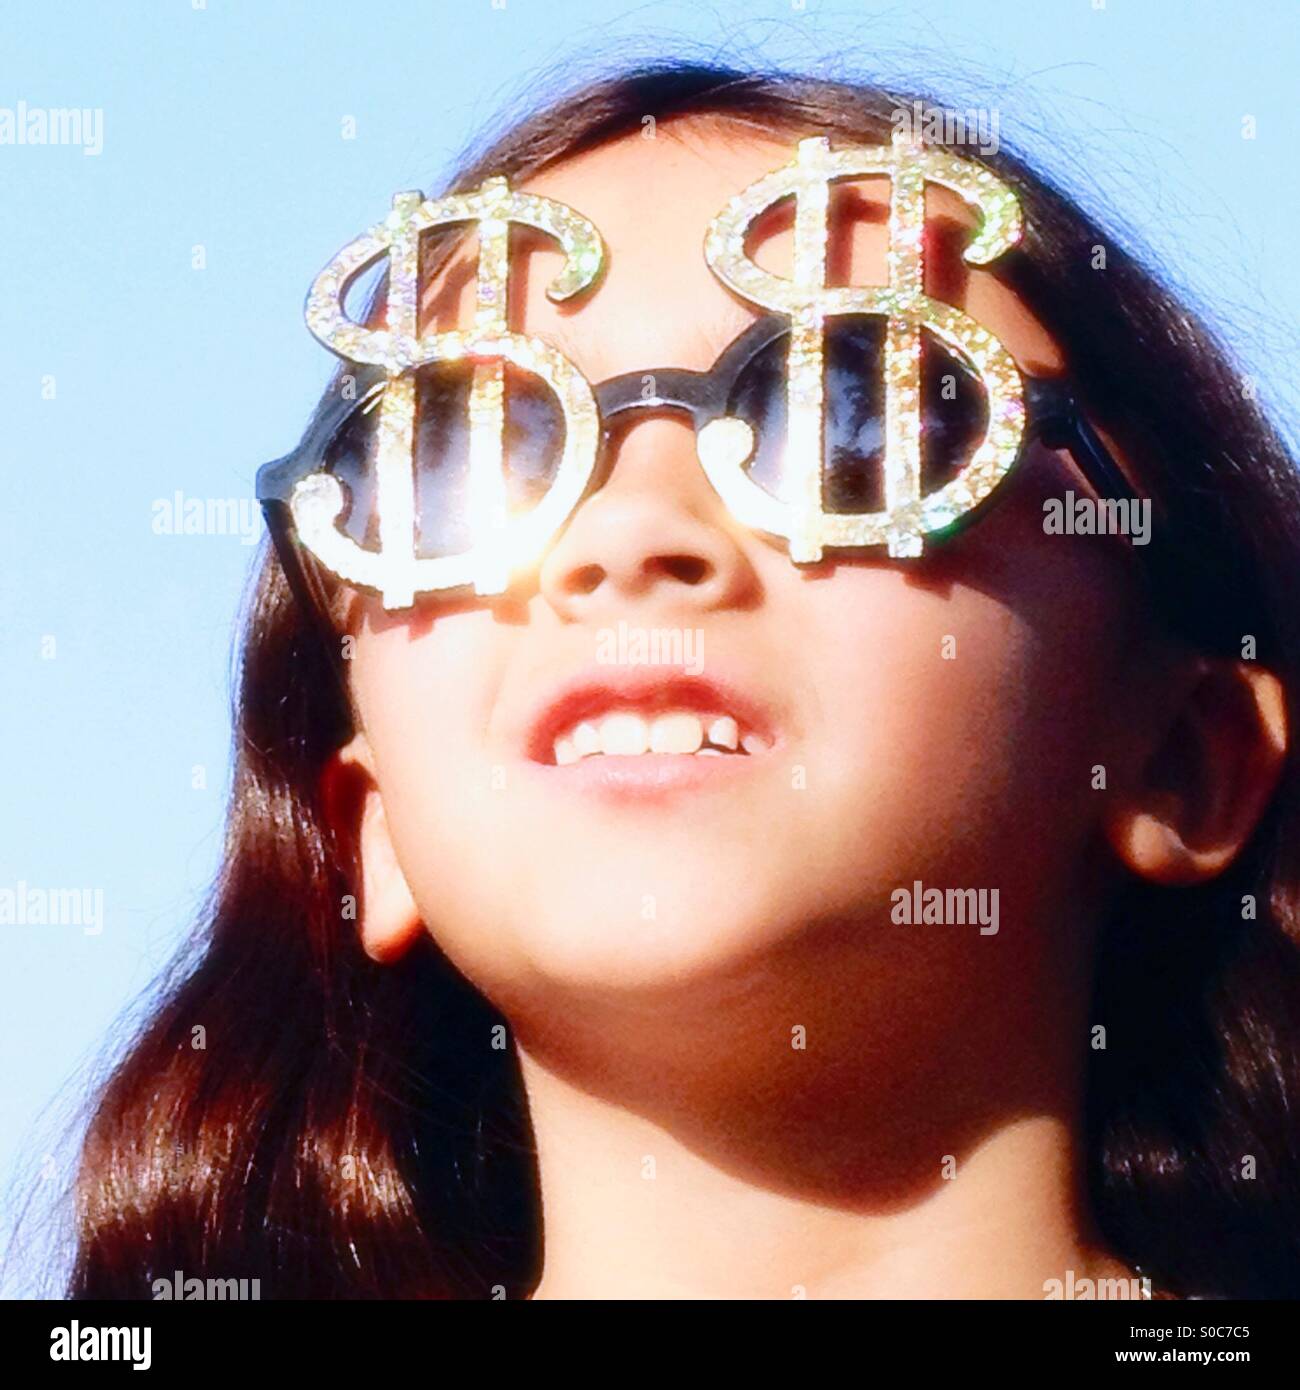 Little girl wearing glasses shaped like dollar signs. Stock Photo